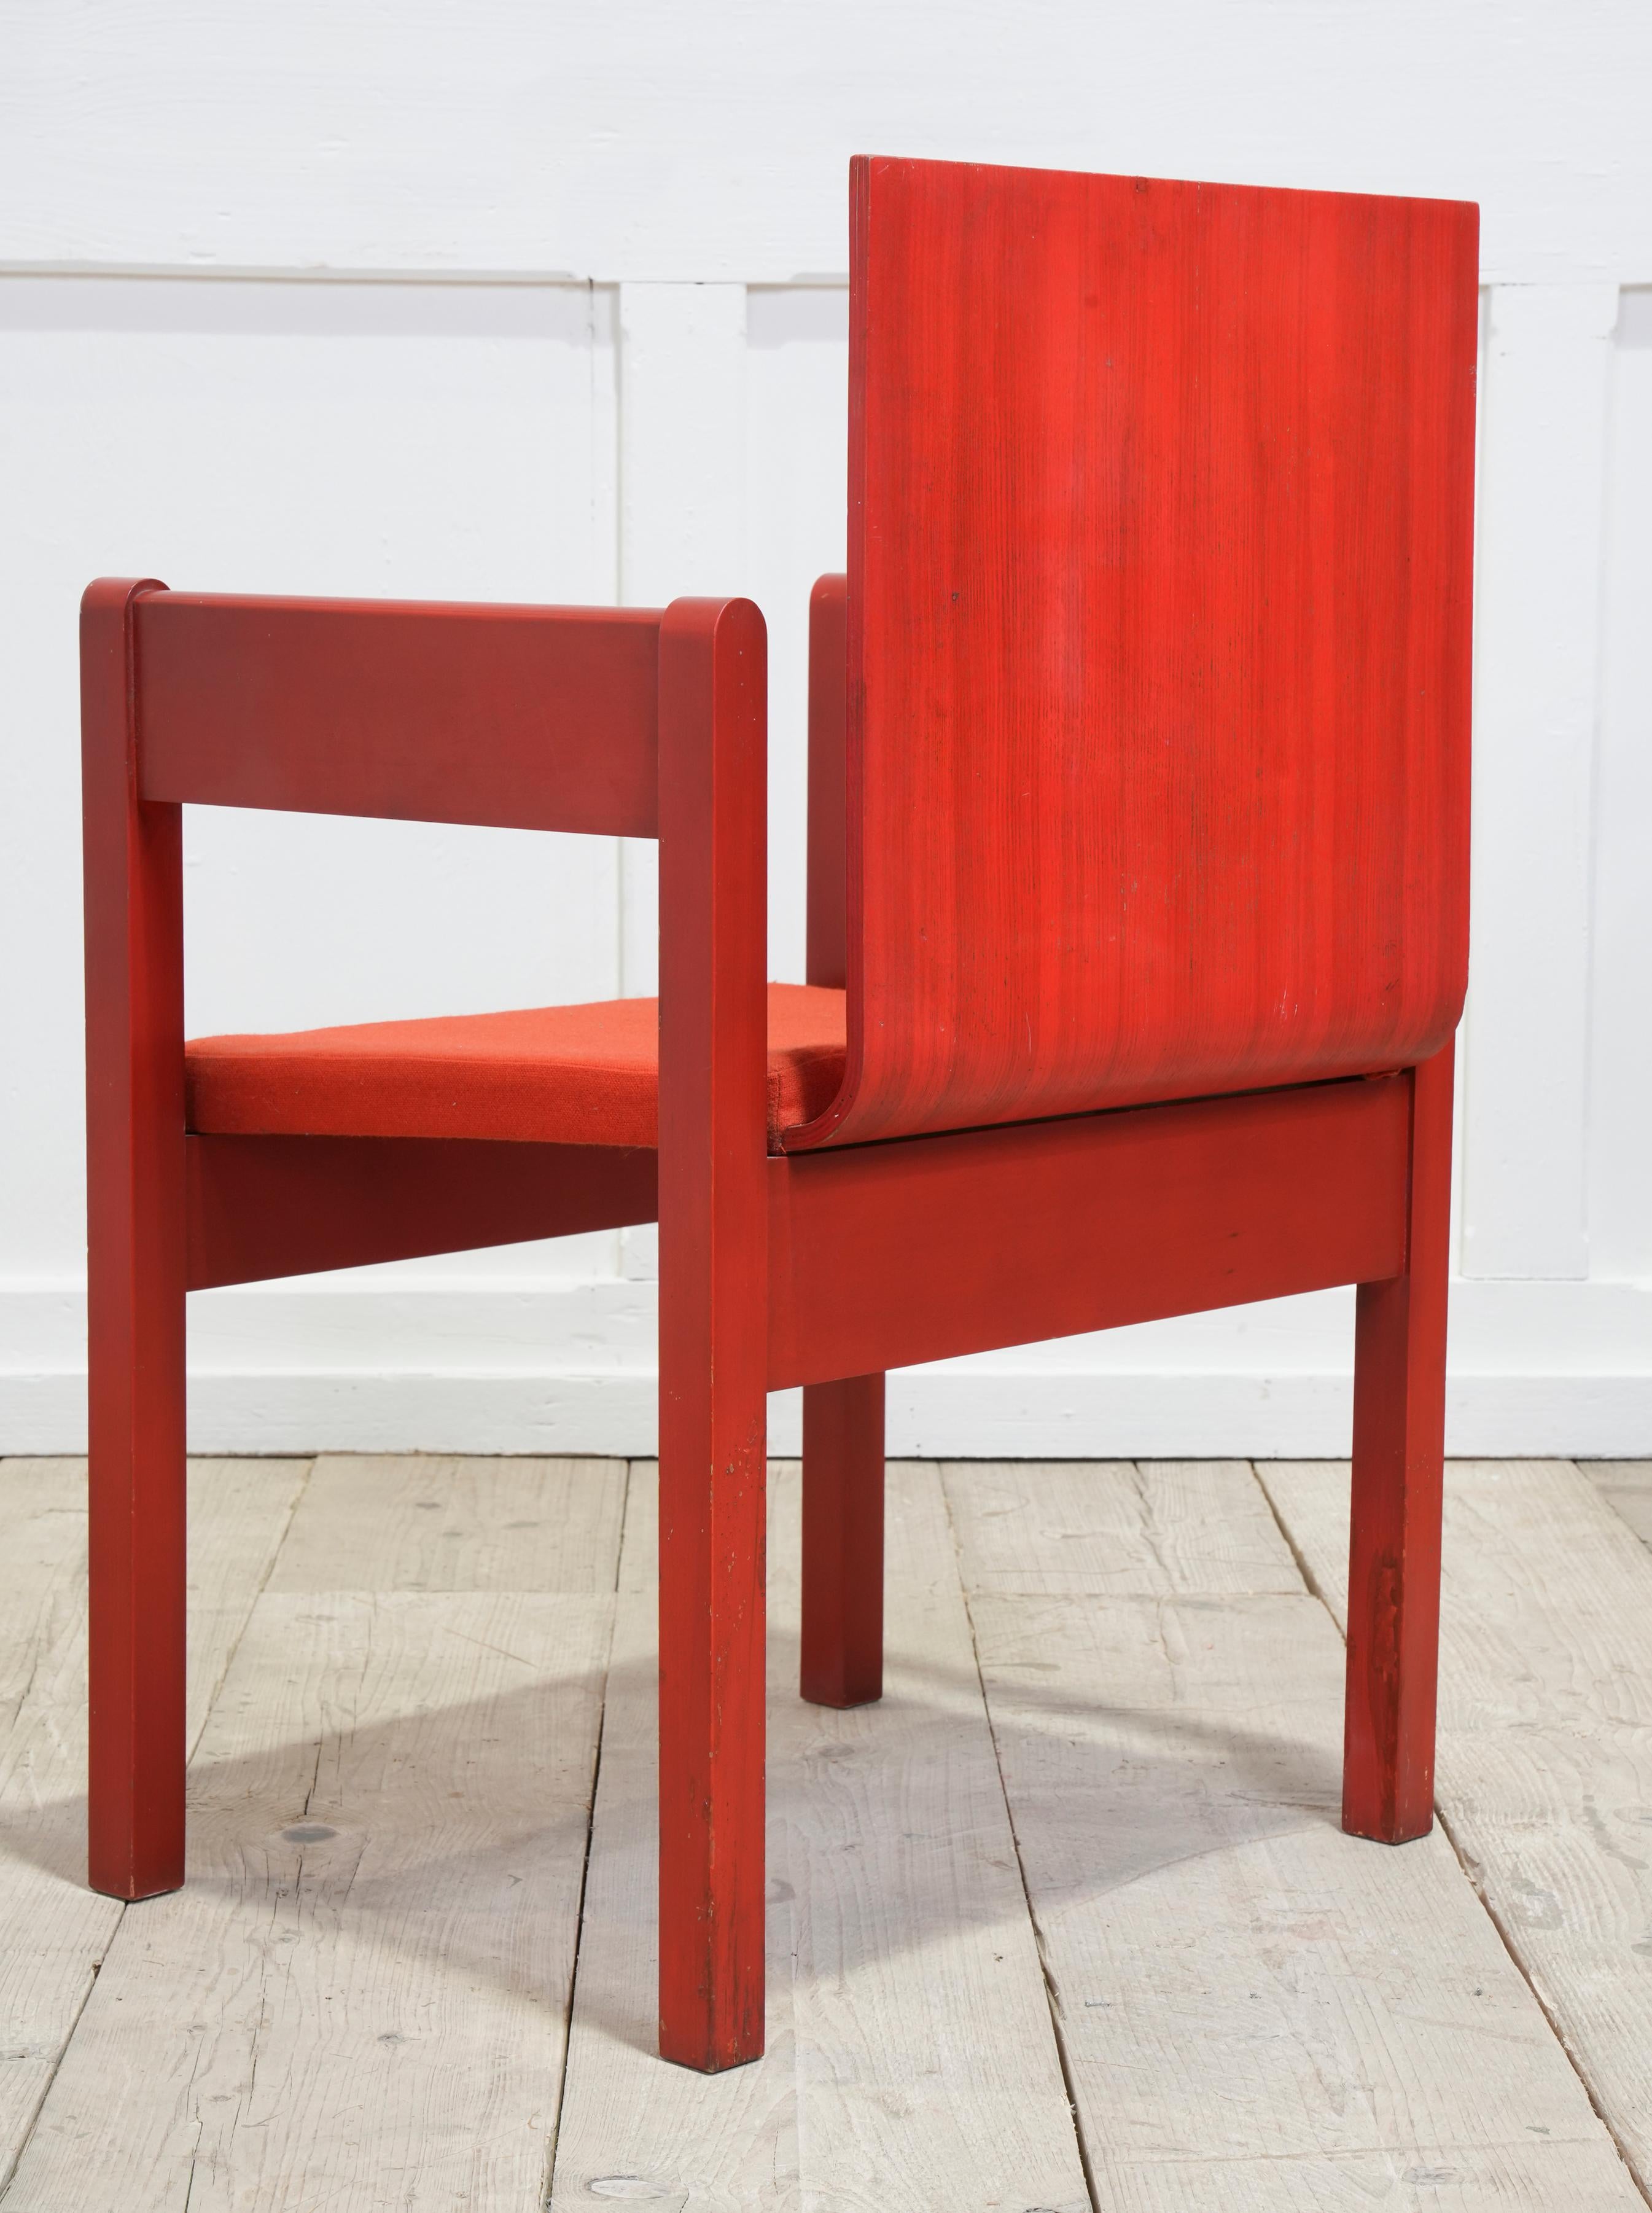 Pine An Investiture “Red” Chair